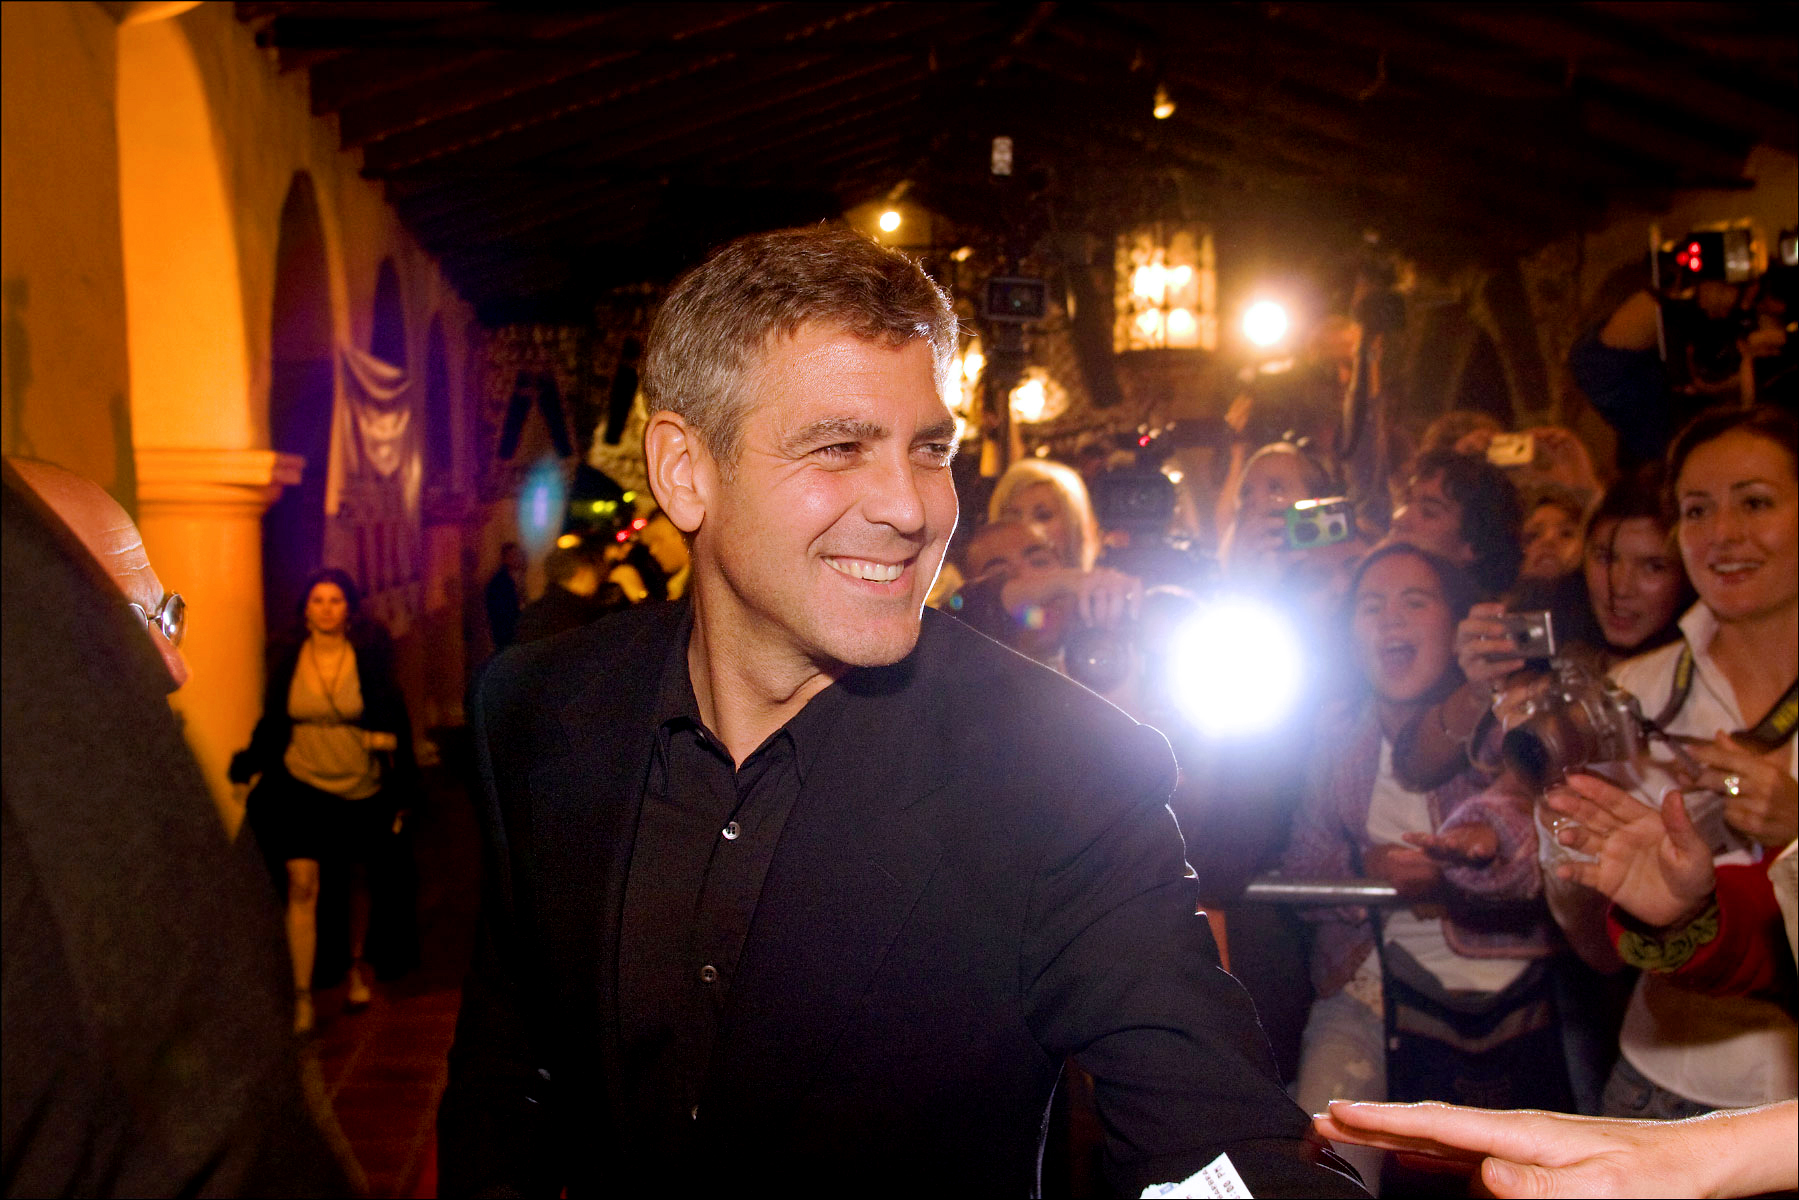 Walking the red carpet with actor George Clooney, at the Arlington Theater during the Santa Barbara International Film Festival.  (for The New Yorker)